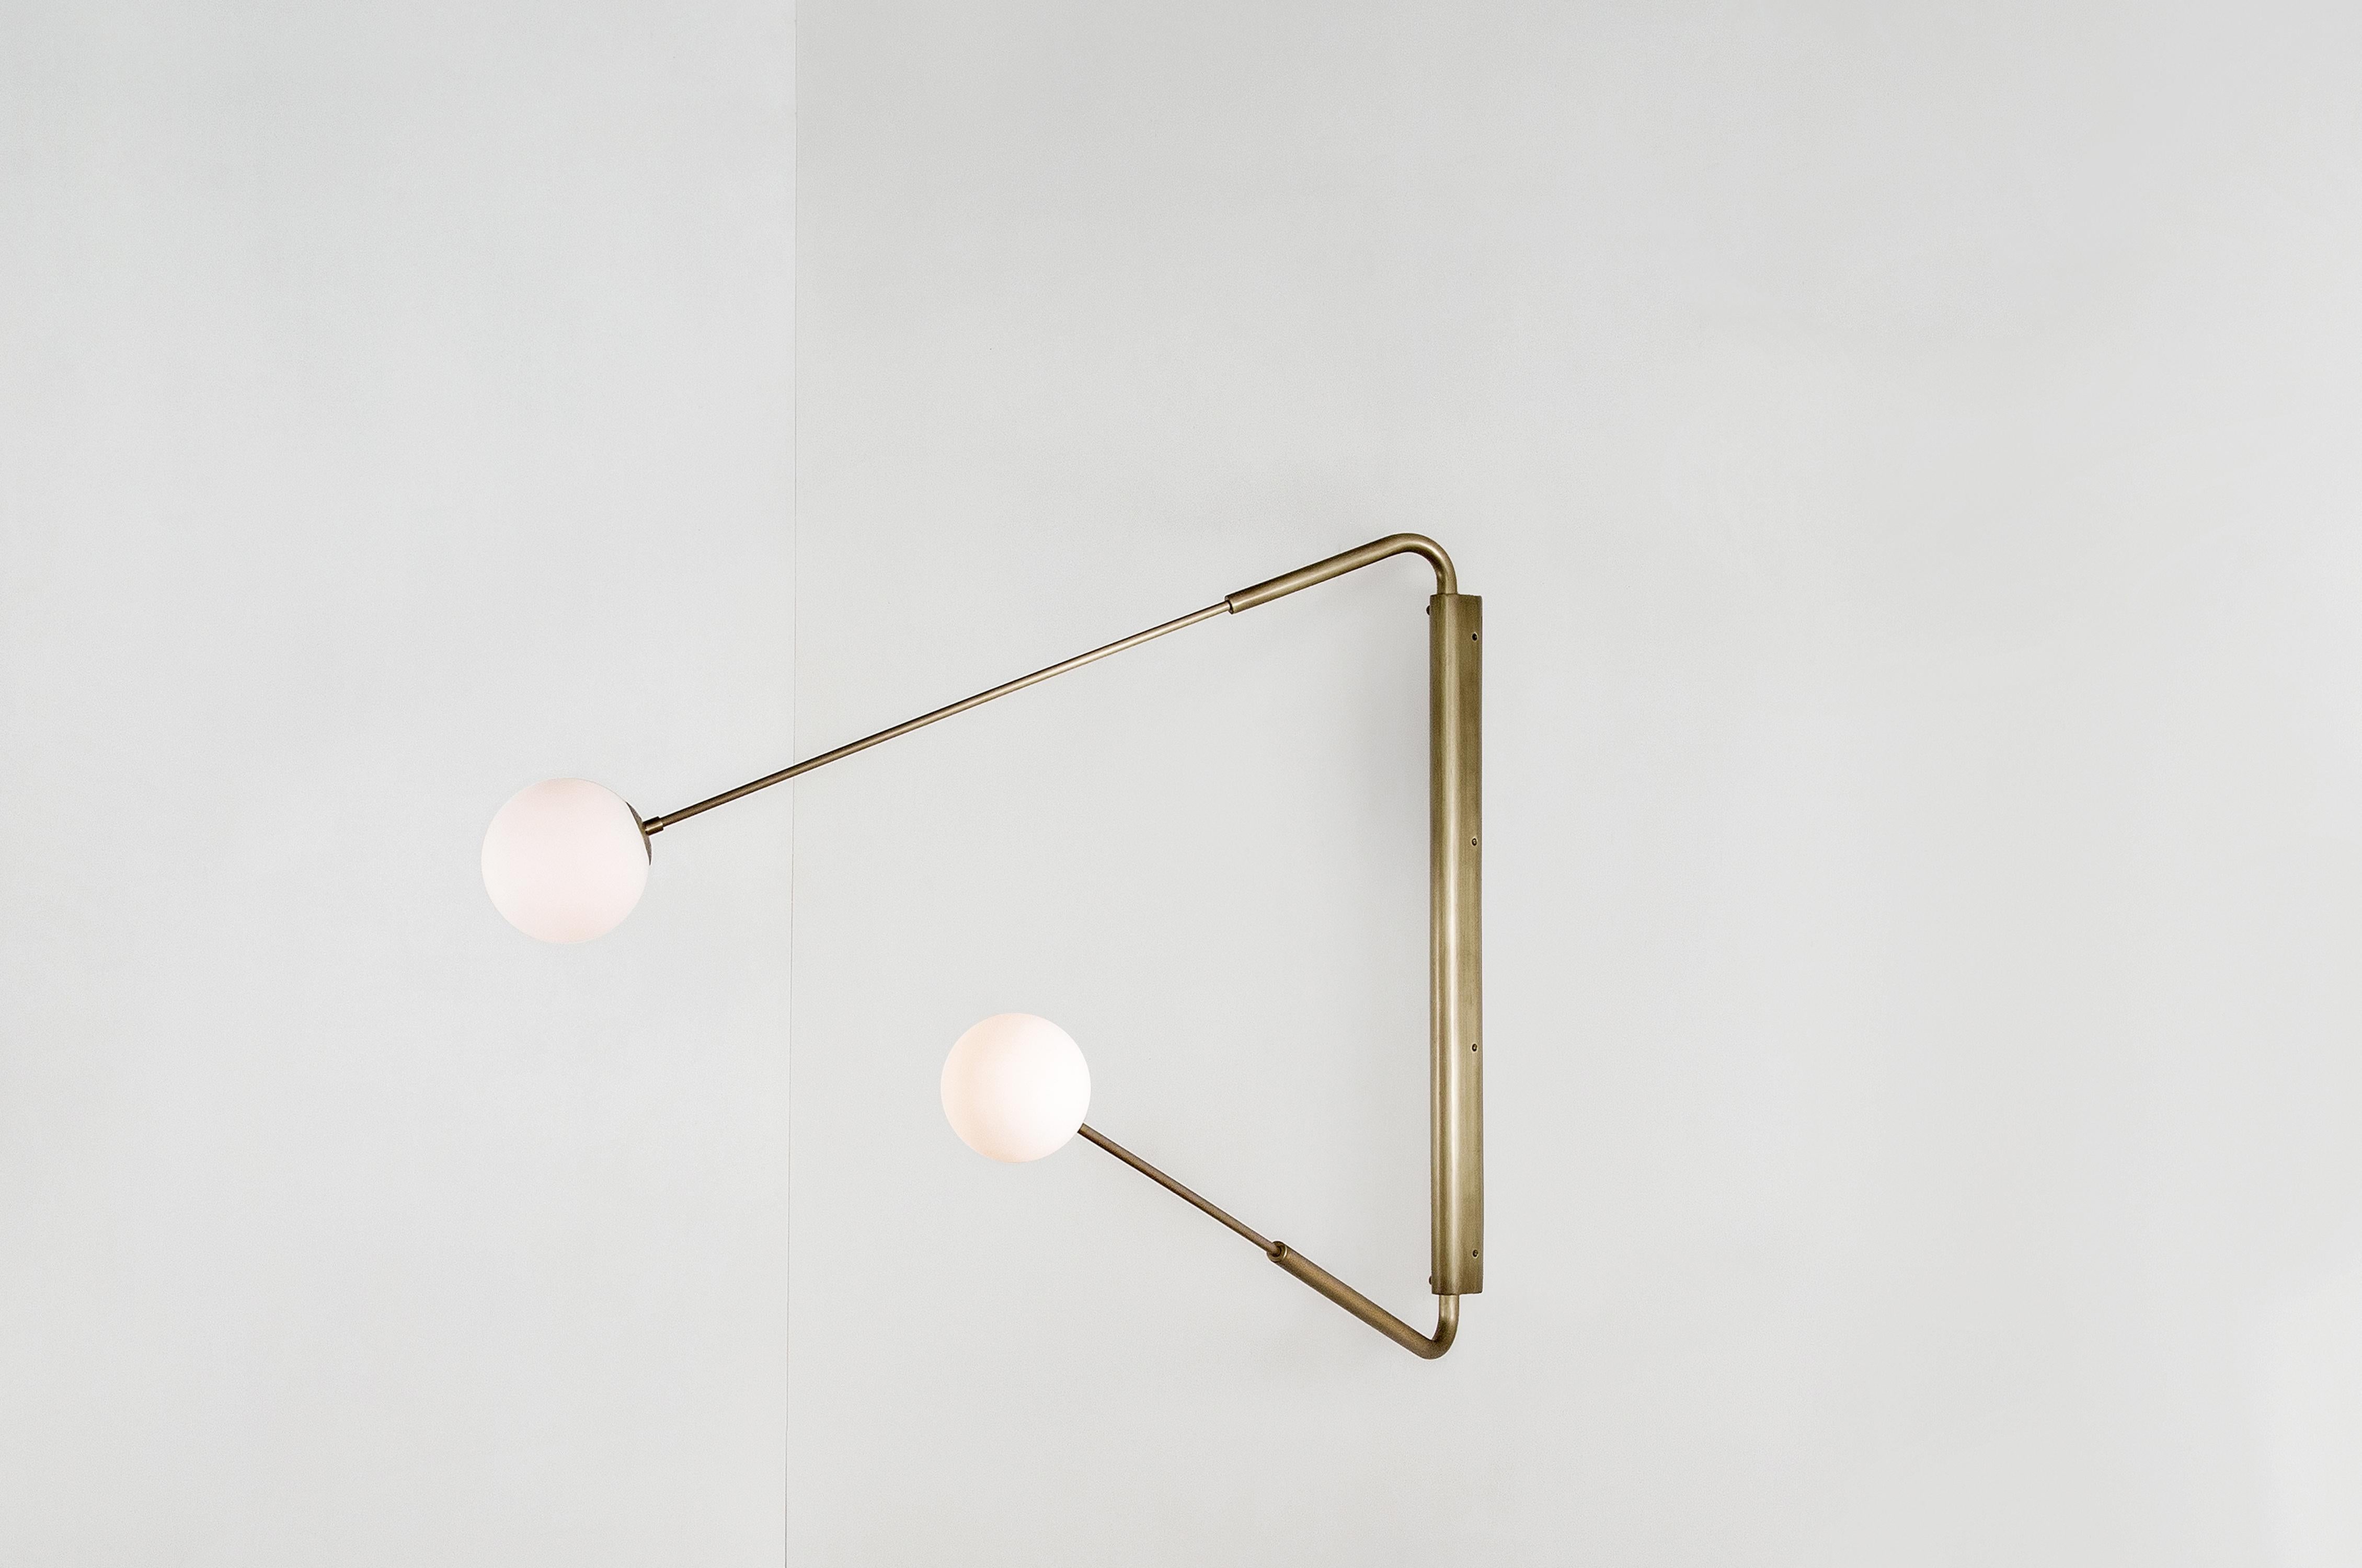 Flutter II, contemporary aged brass sconce by Paul Matter
Available in black burnt brass or black burnt brass with etched glass
Total measure: 40” H x 48” W
Globe to globe dimensions when fully opened: 95”’
Minimum 28” H x 34” W
Maximum 60” H x